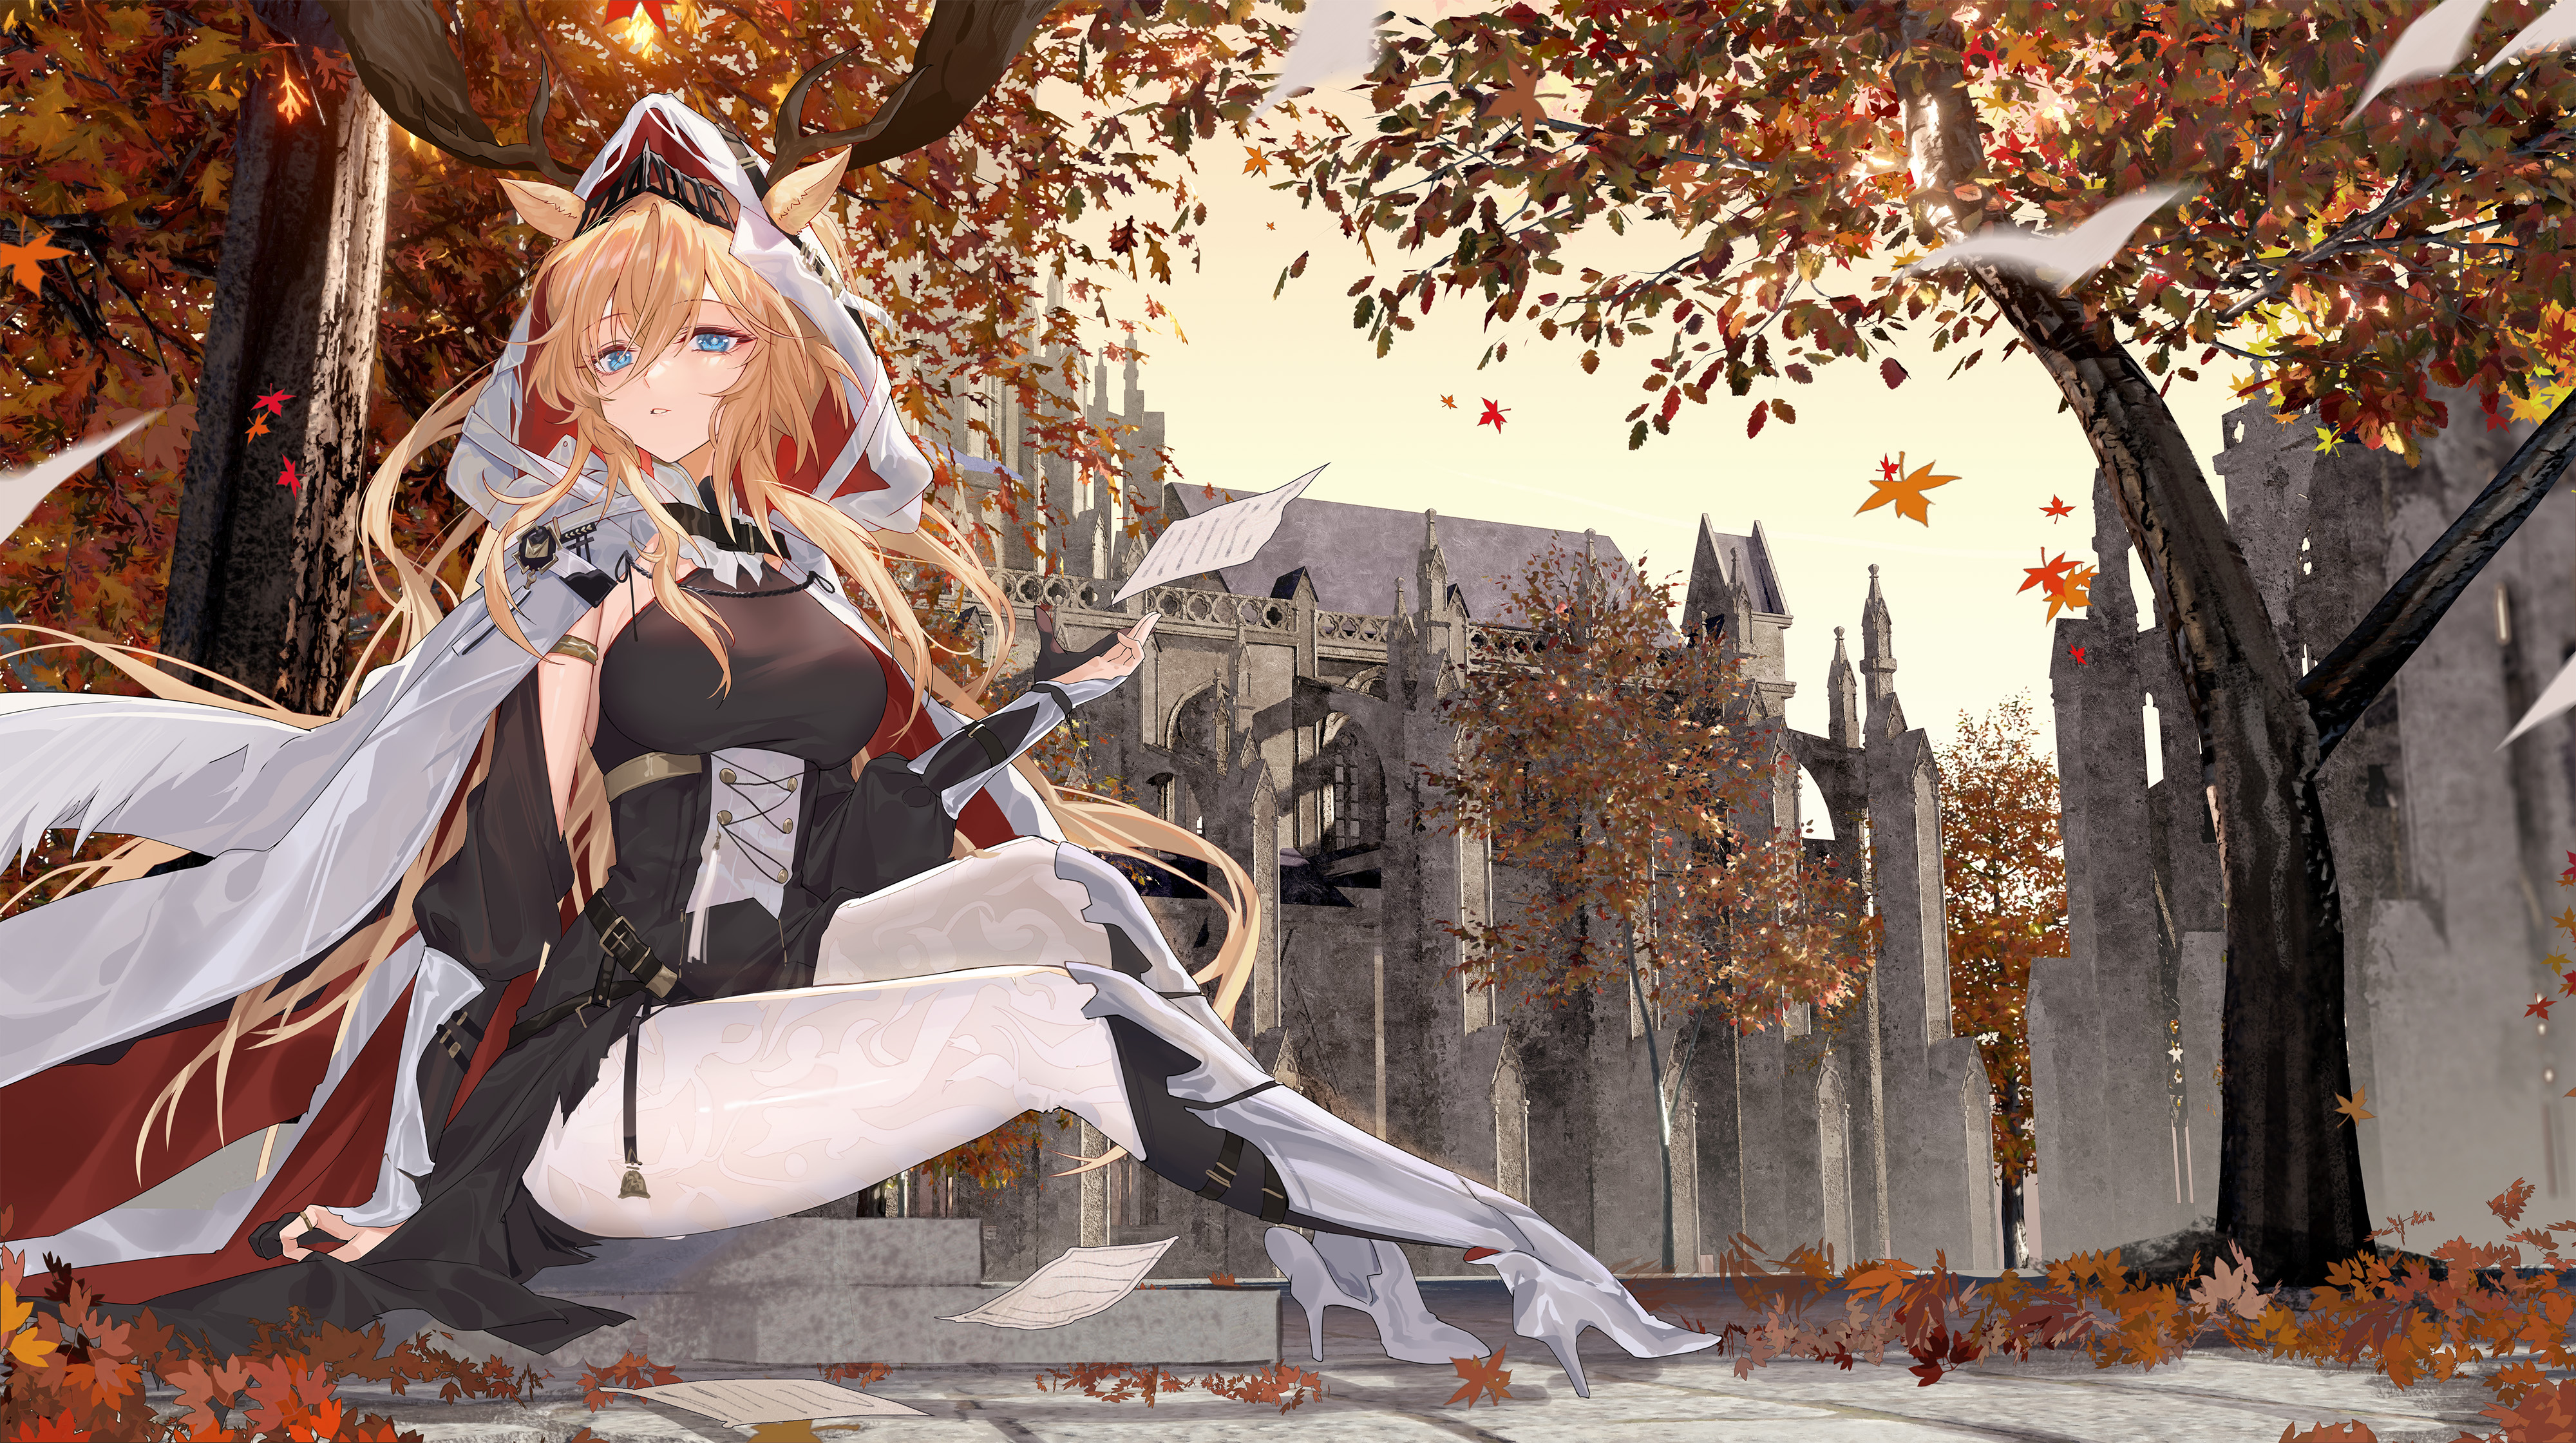 Anime 4000x2240 anime anime girls The Candle Knight Viviana (Arknights) long hair blonde blue eyes sitting heels fall leaves building cathedral paper fox girl fox ears hoods